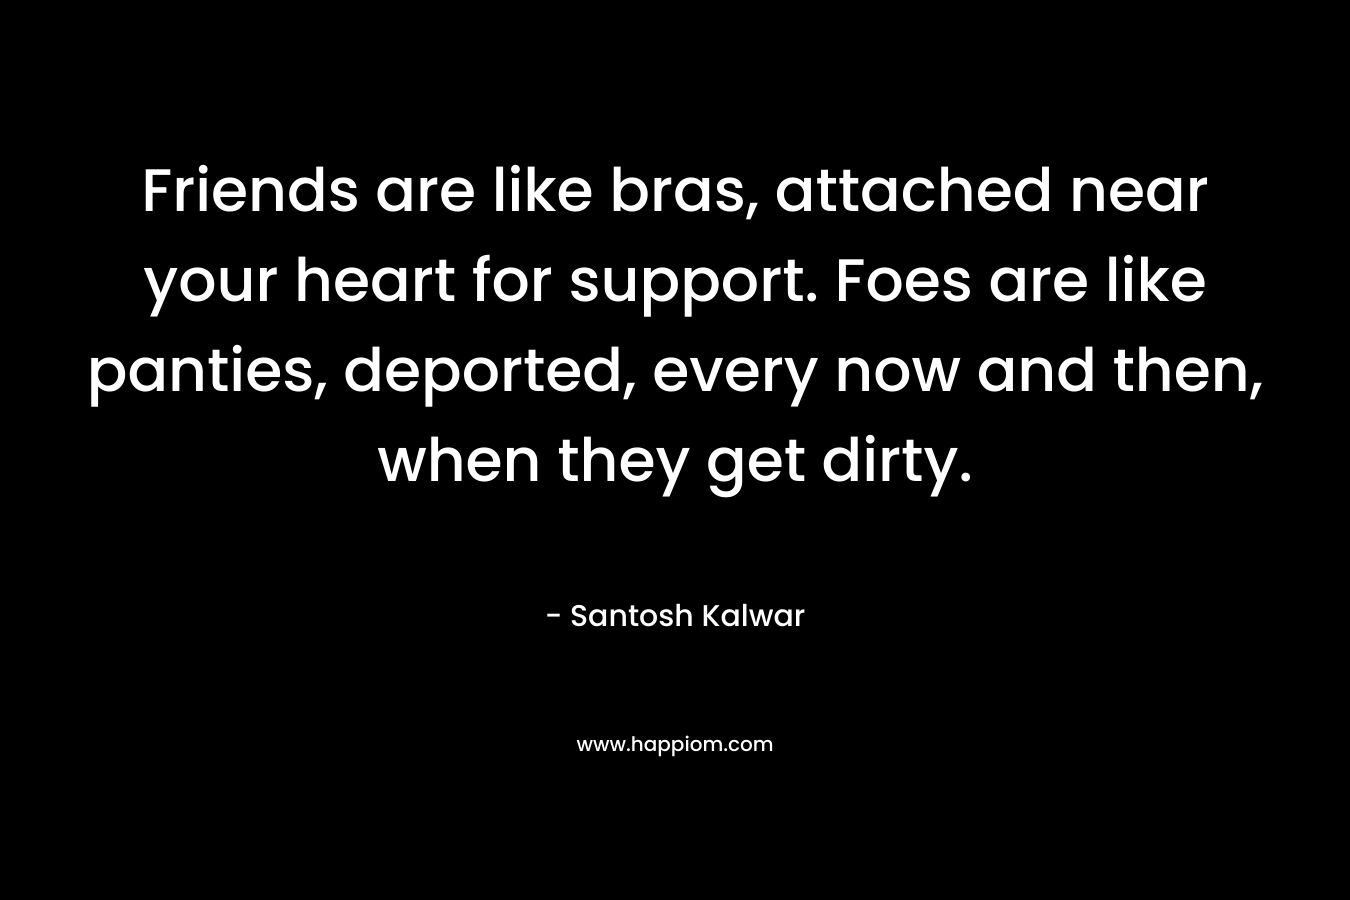 Friends are like bras, attached near your heart for support. Foes are like panties, deported, every now and then, when they get dirty.